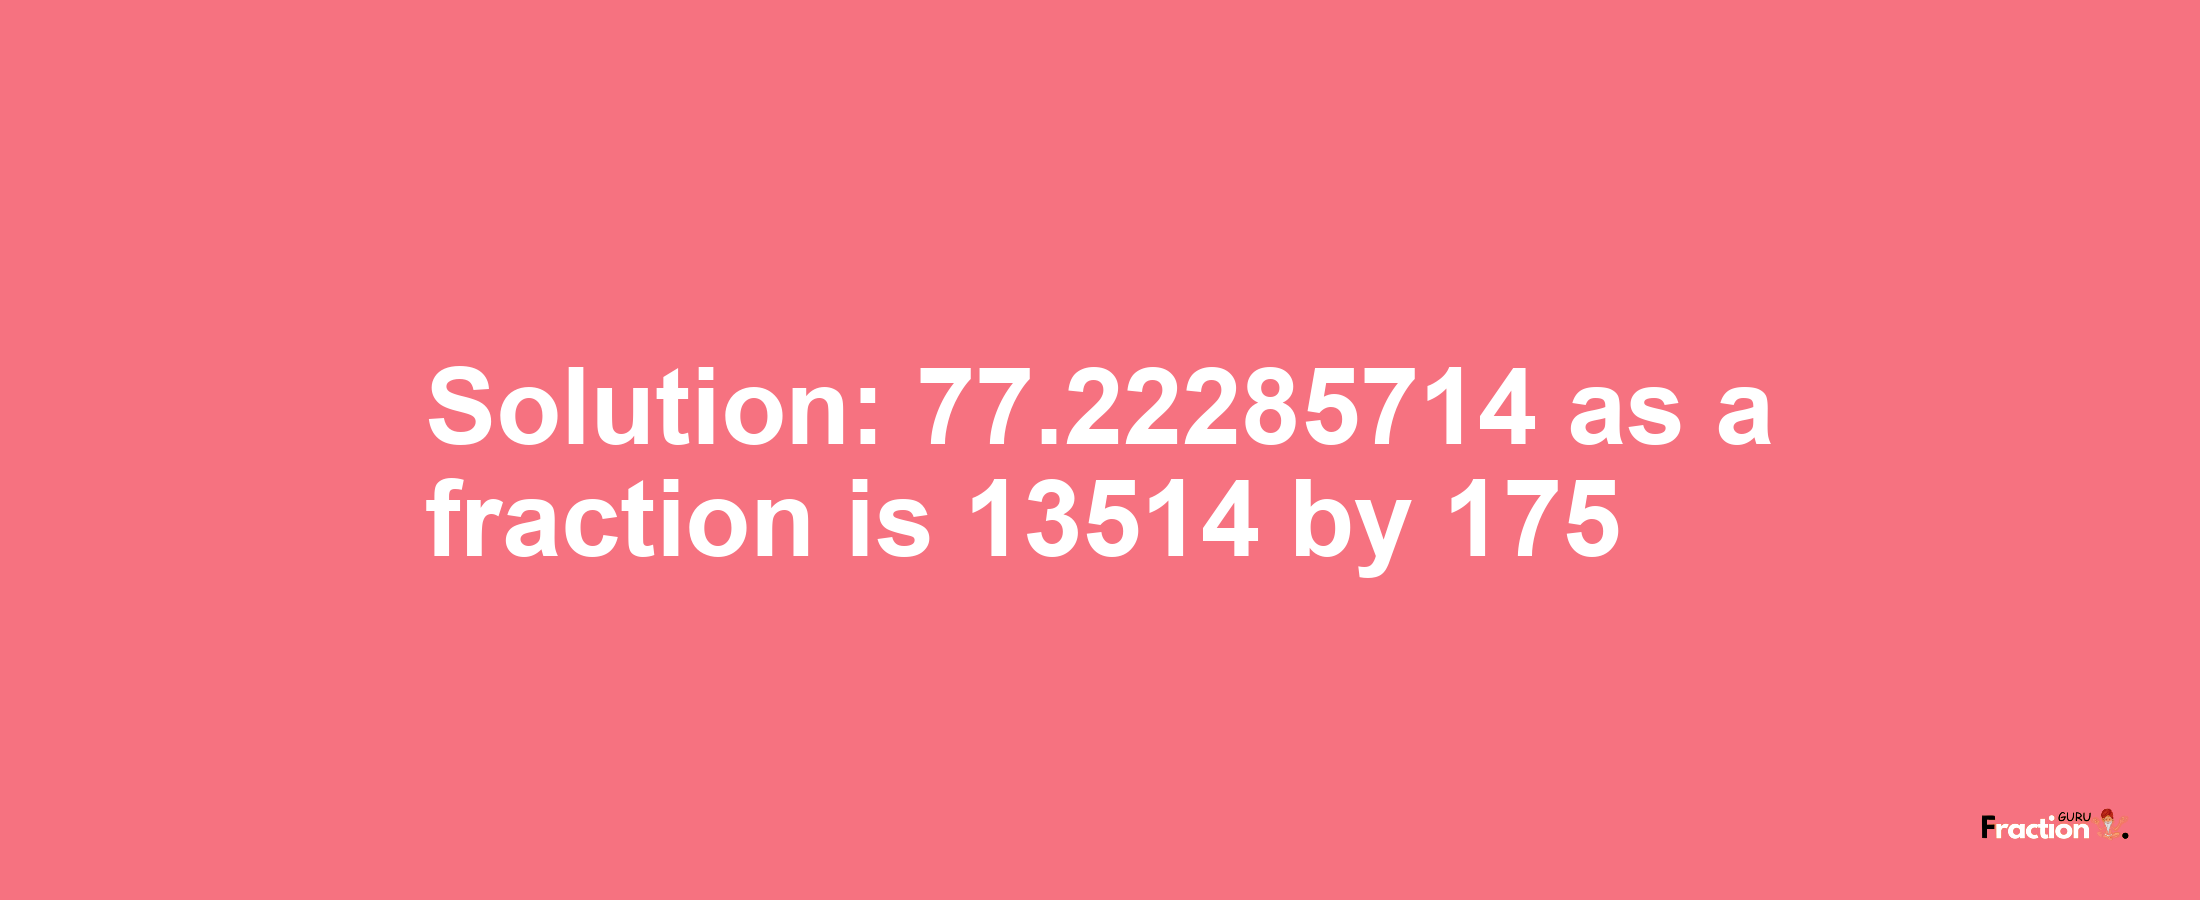 Solution:77.22285714 as a fraction is 13514/175